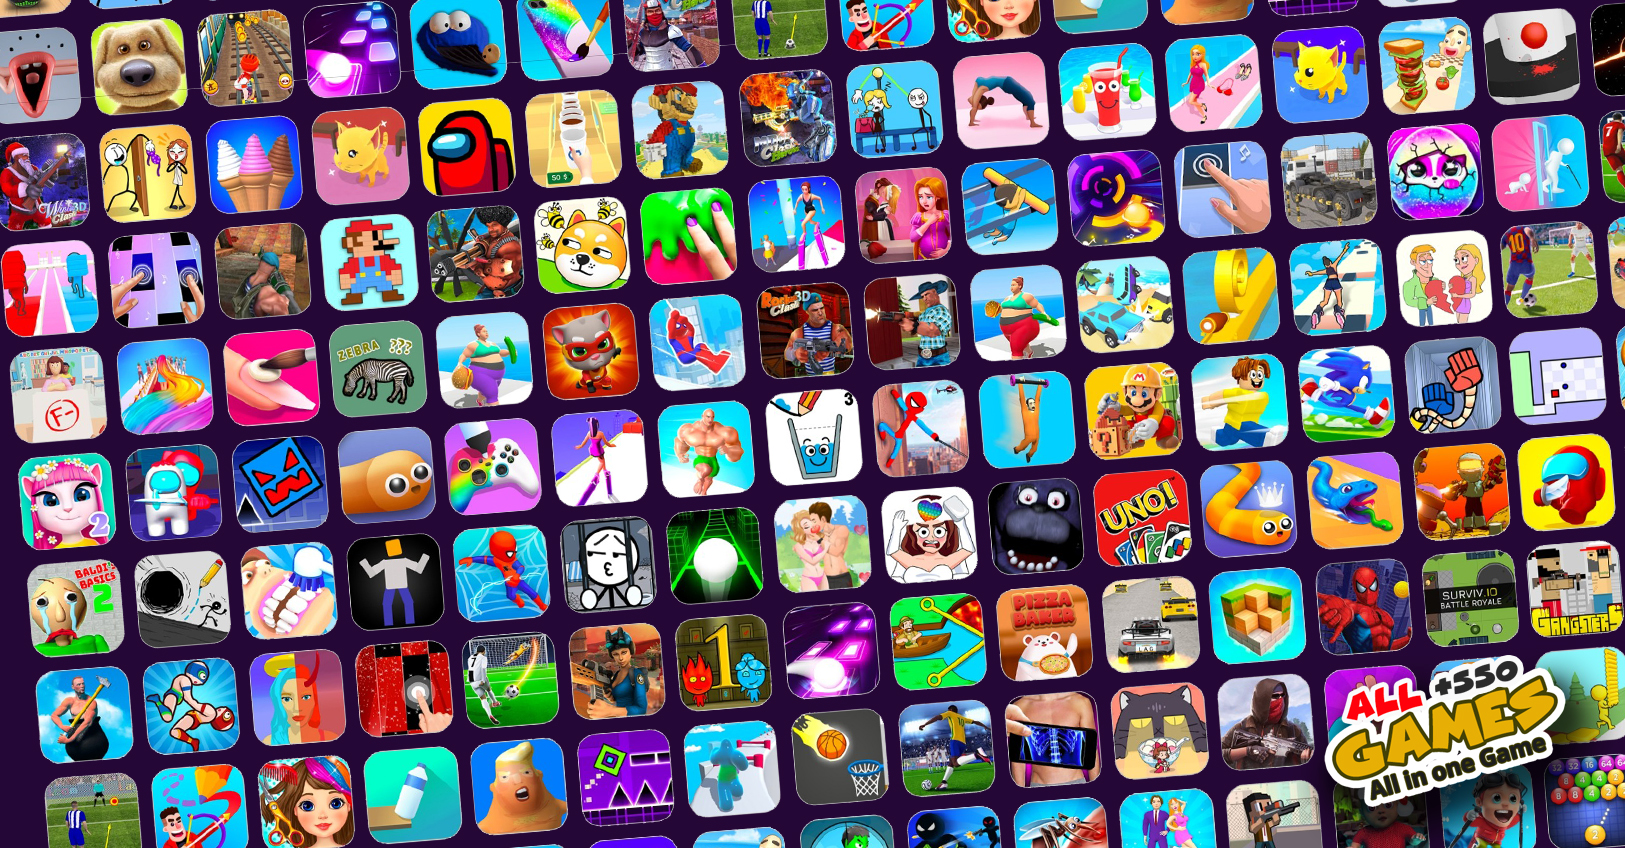 All Games - more than 550 games in one application